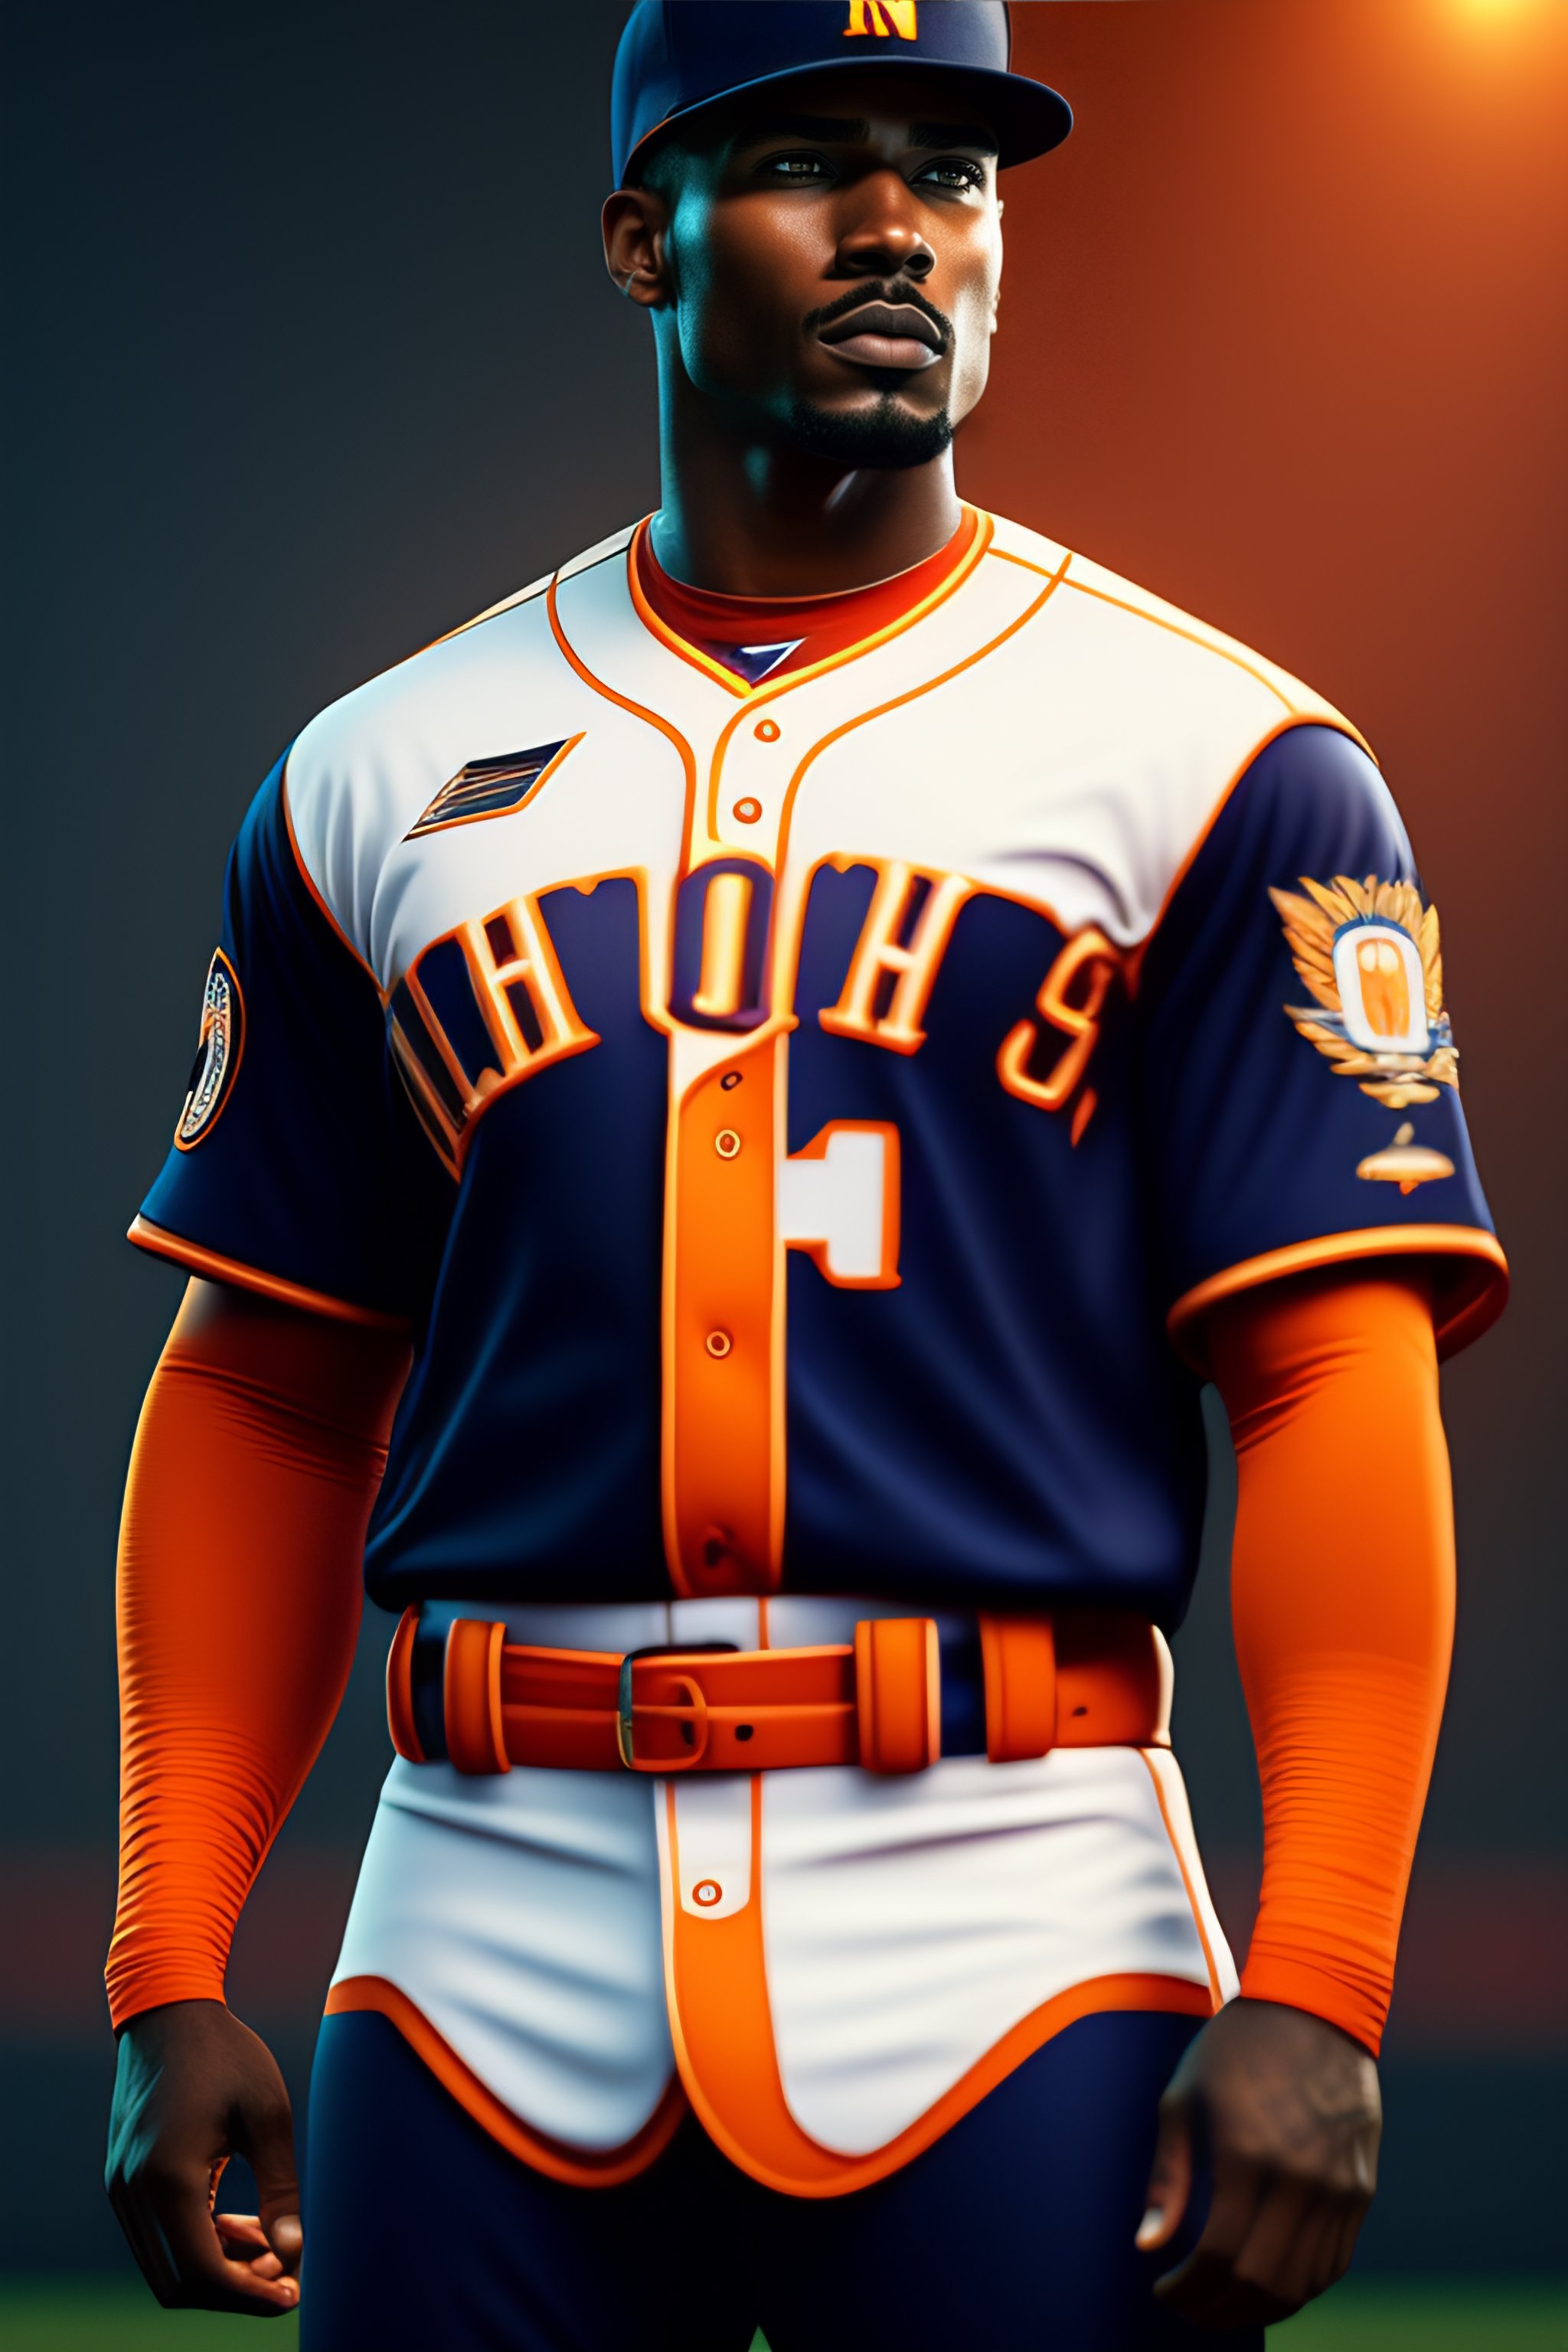 Lexica - Baseball uniform with the lettering ninth inning